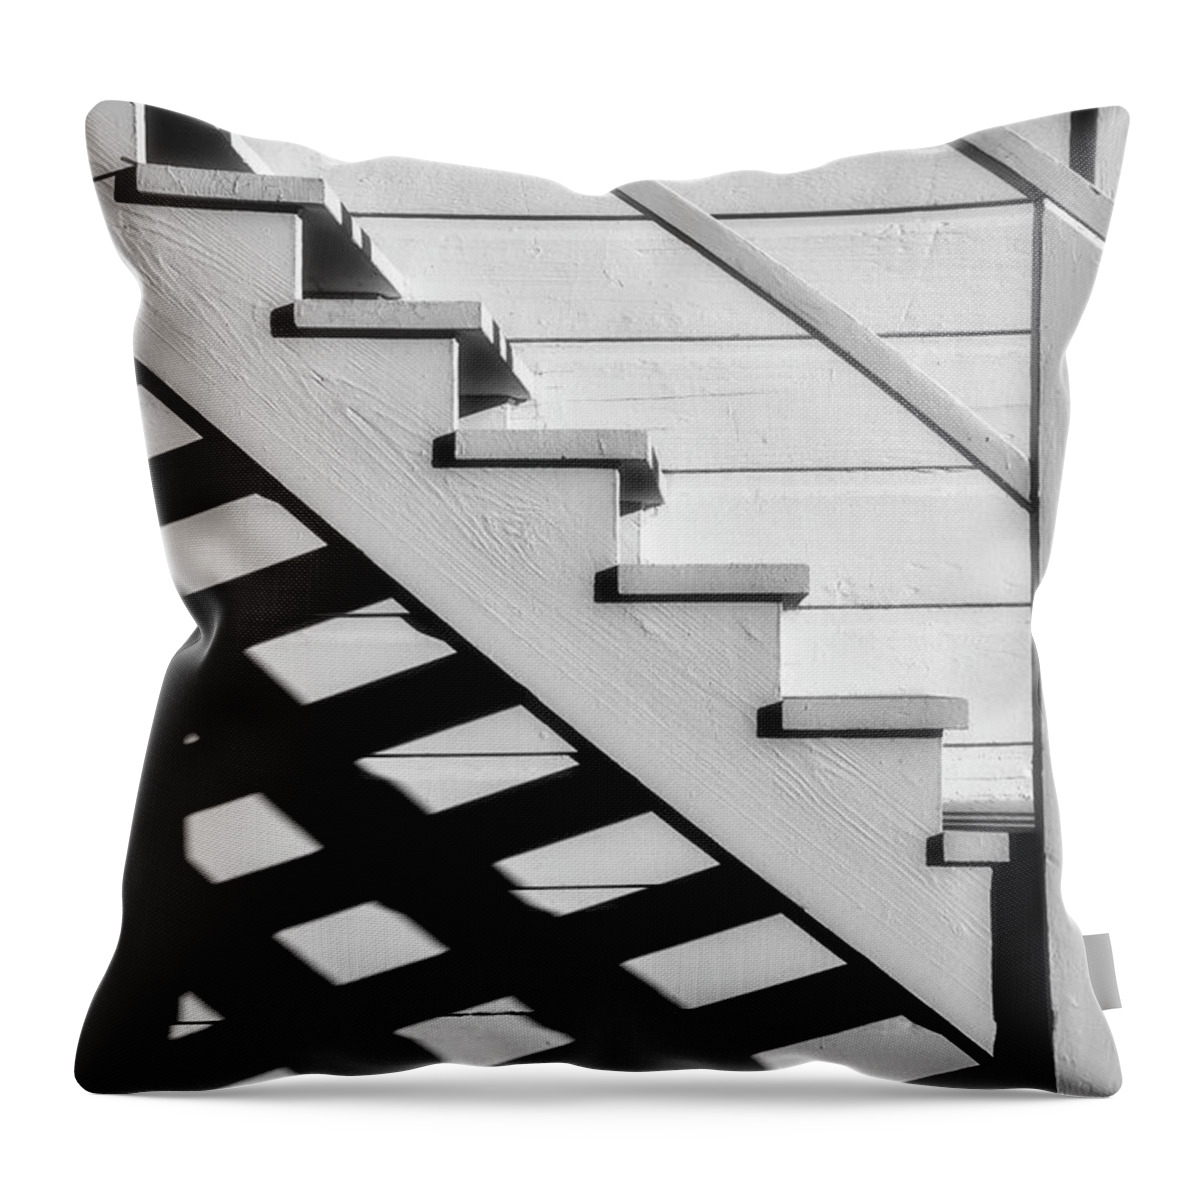 Stairs Throw Pillow featuring the photograph Stairs In Black And White by Garry Gay